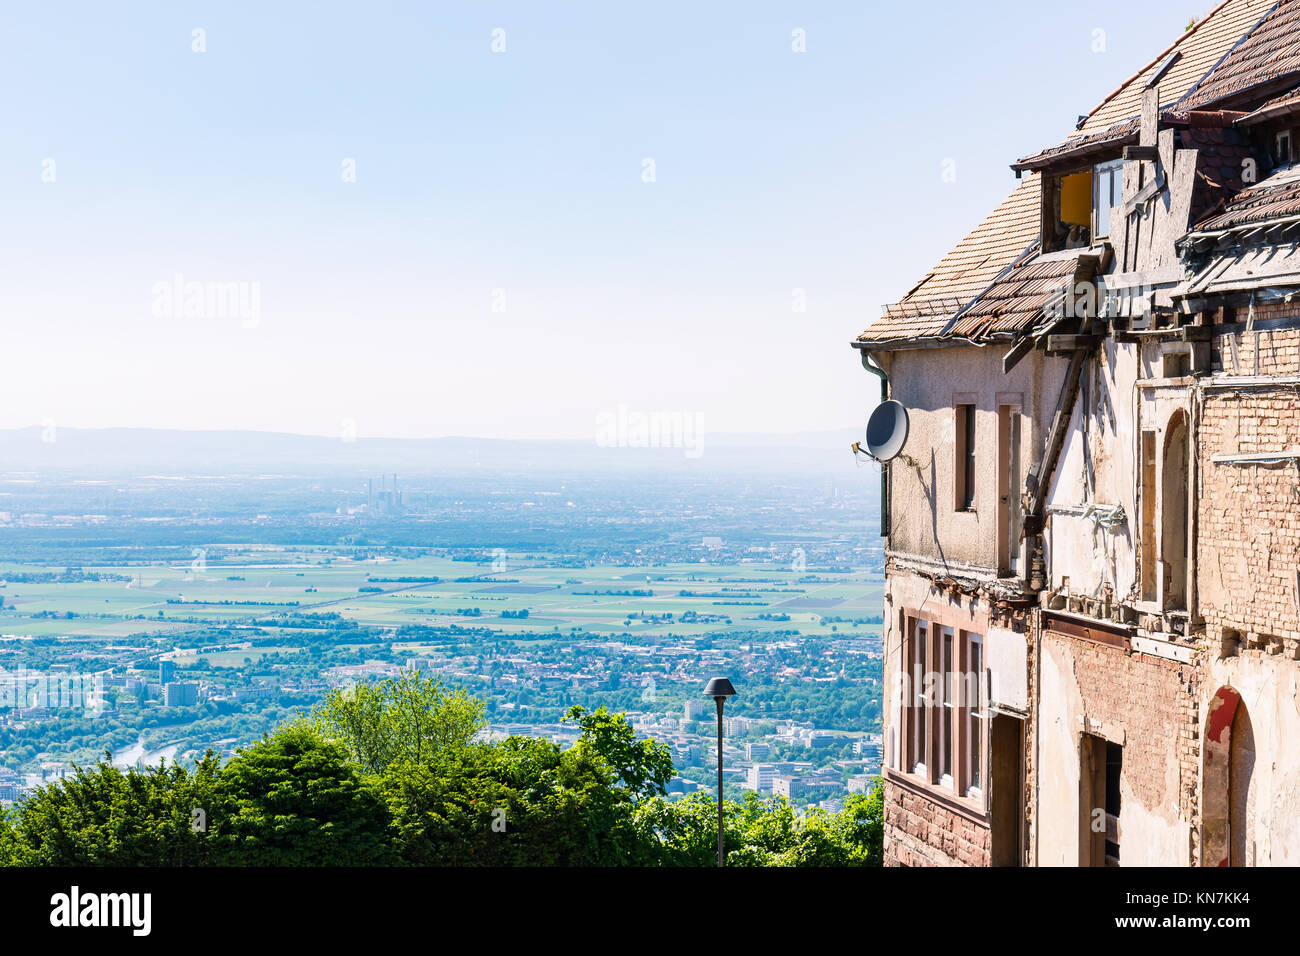 House Under Construction Overlooking Beautiful Landscape View Germany Europe Stock Photo